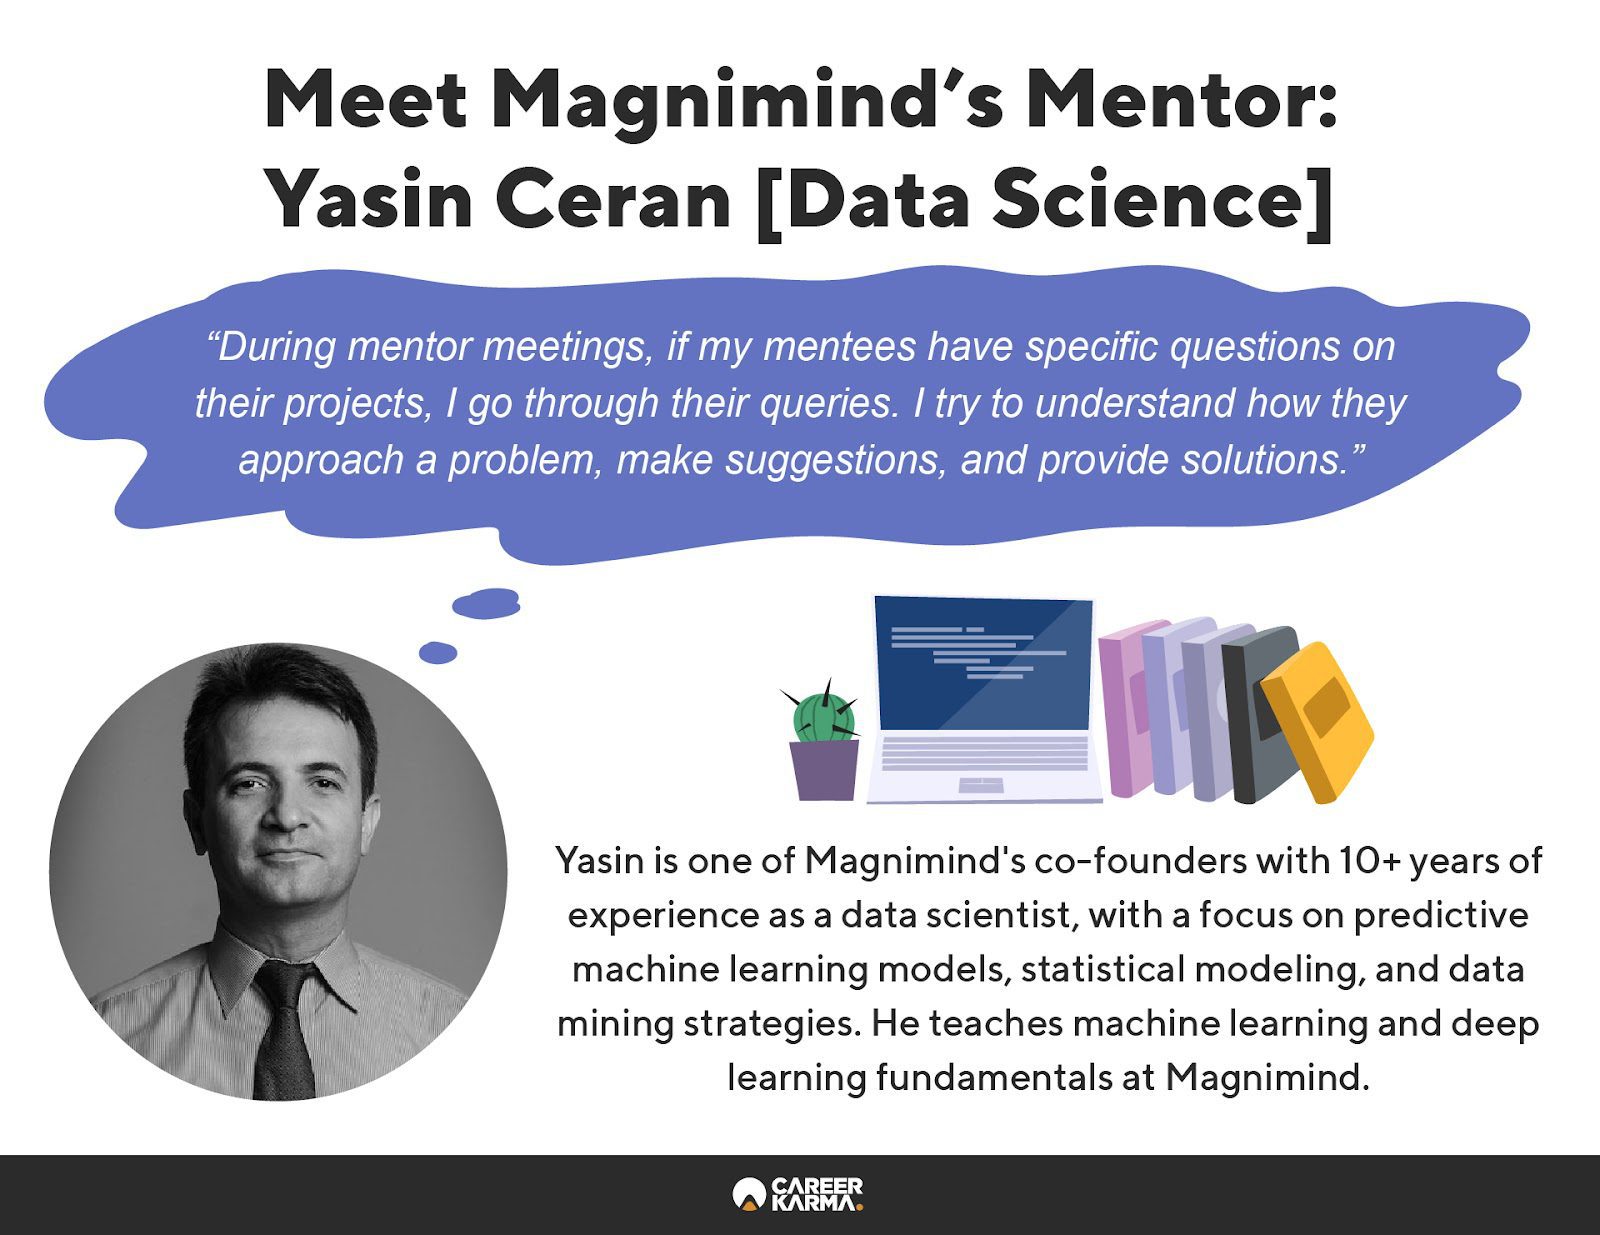 Infographic highlighting the profile of Magnimind’s mentor Yasin Ceran